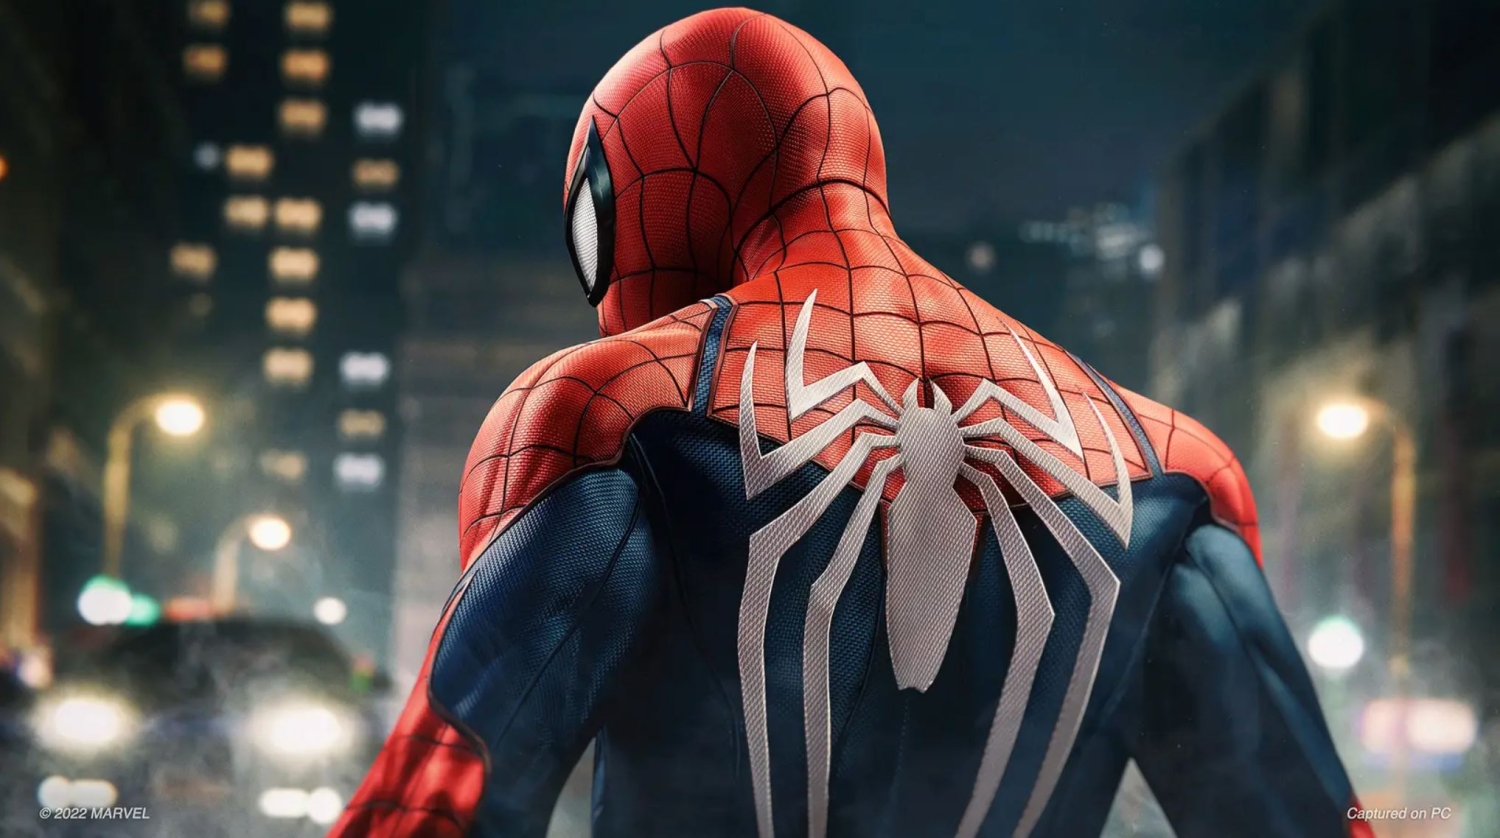 PS4, PS5 exclusives Spider-Man & Miles Morales coming to PC in 2022